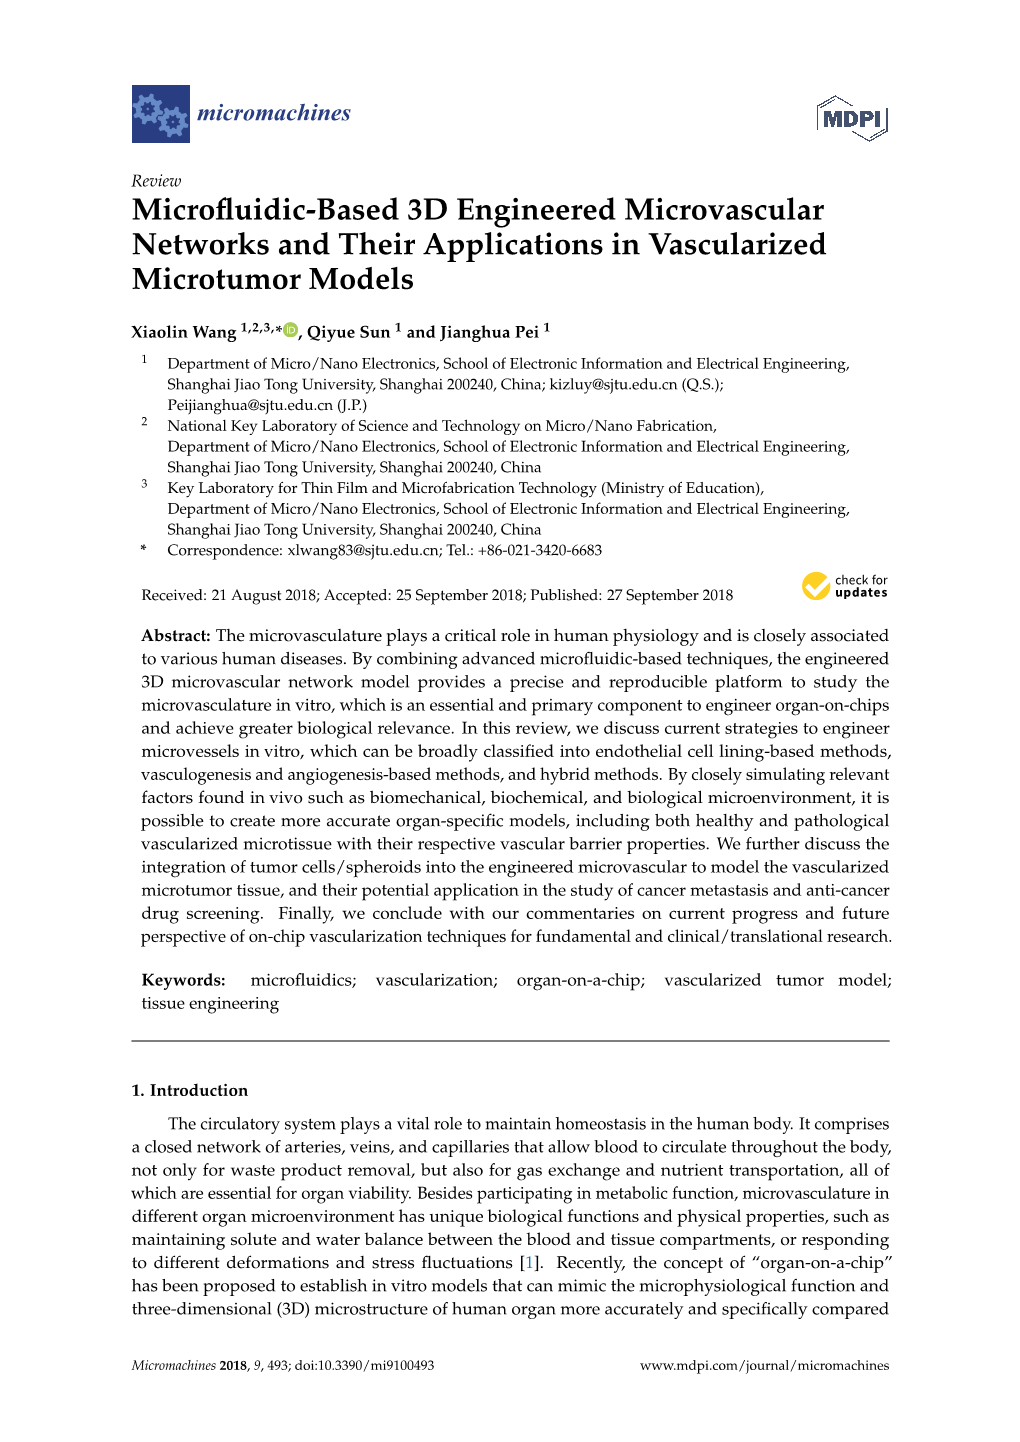 Microfluidic-Based 3D Engineered Microvascular Networks and Their